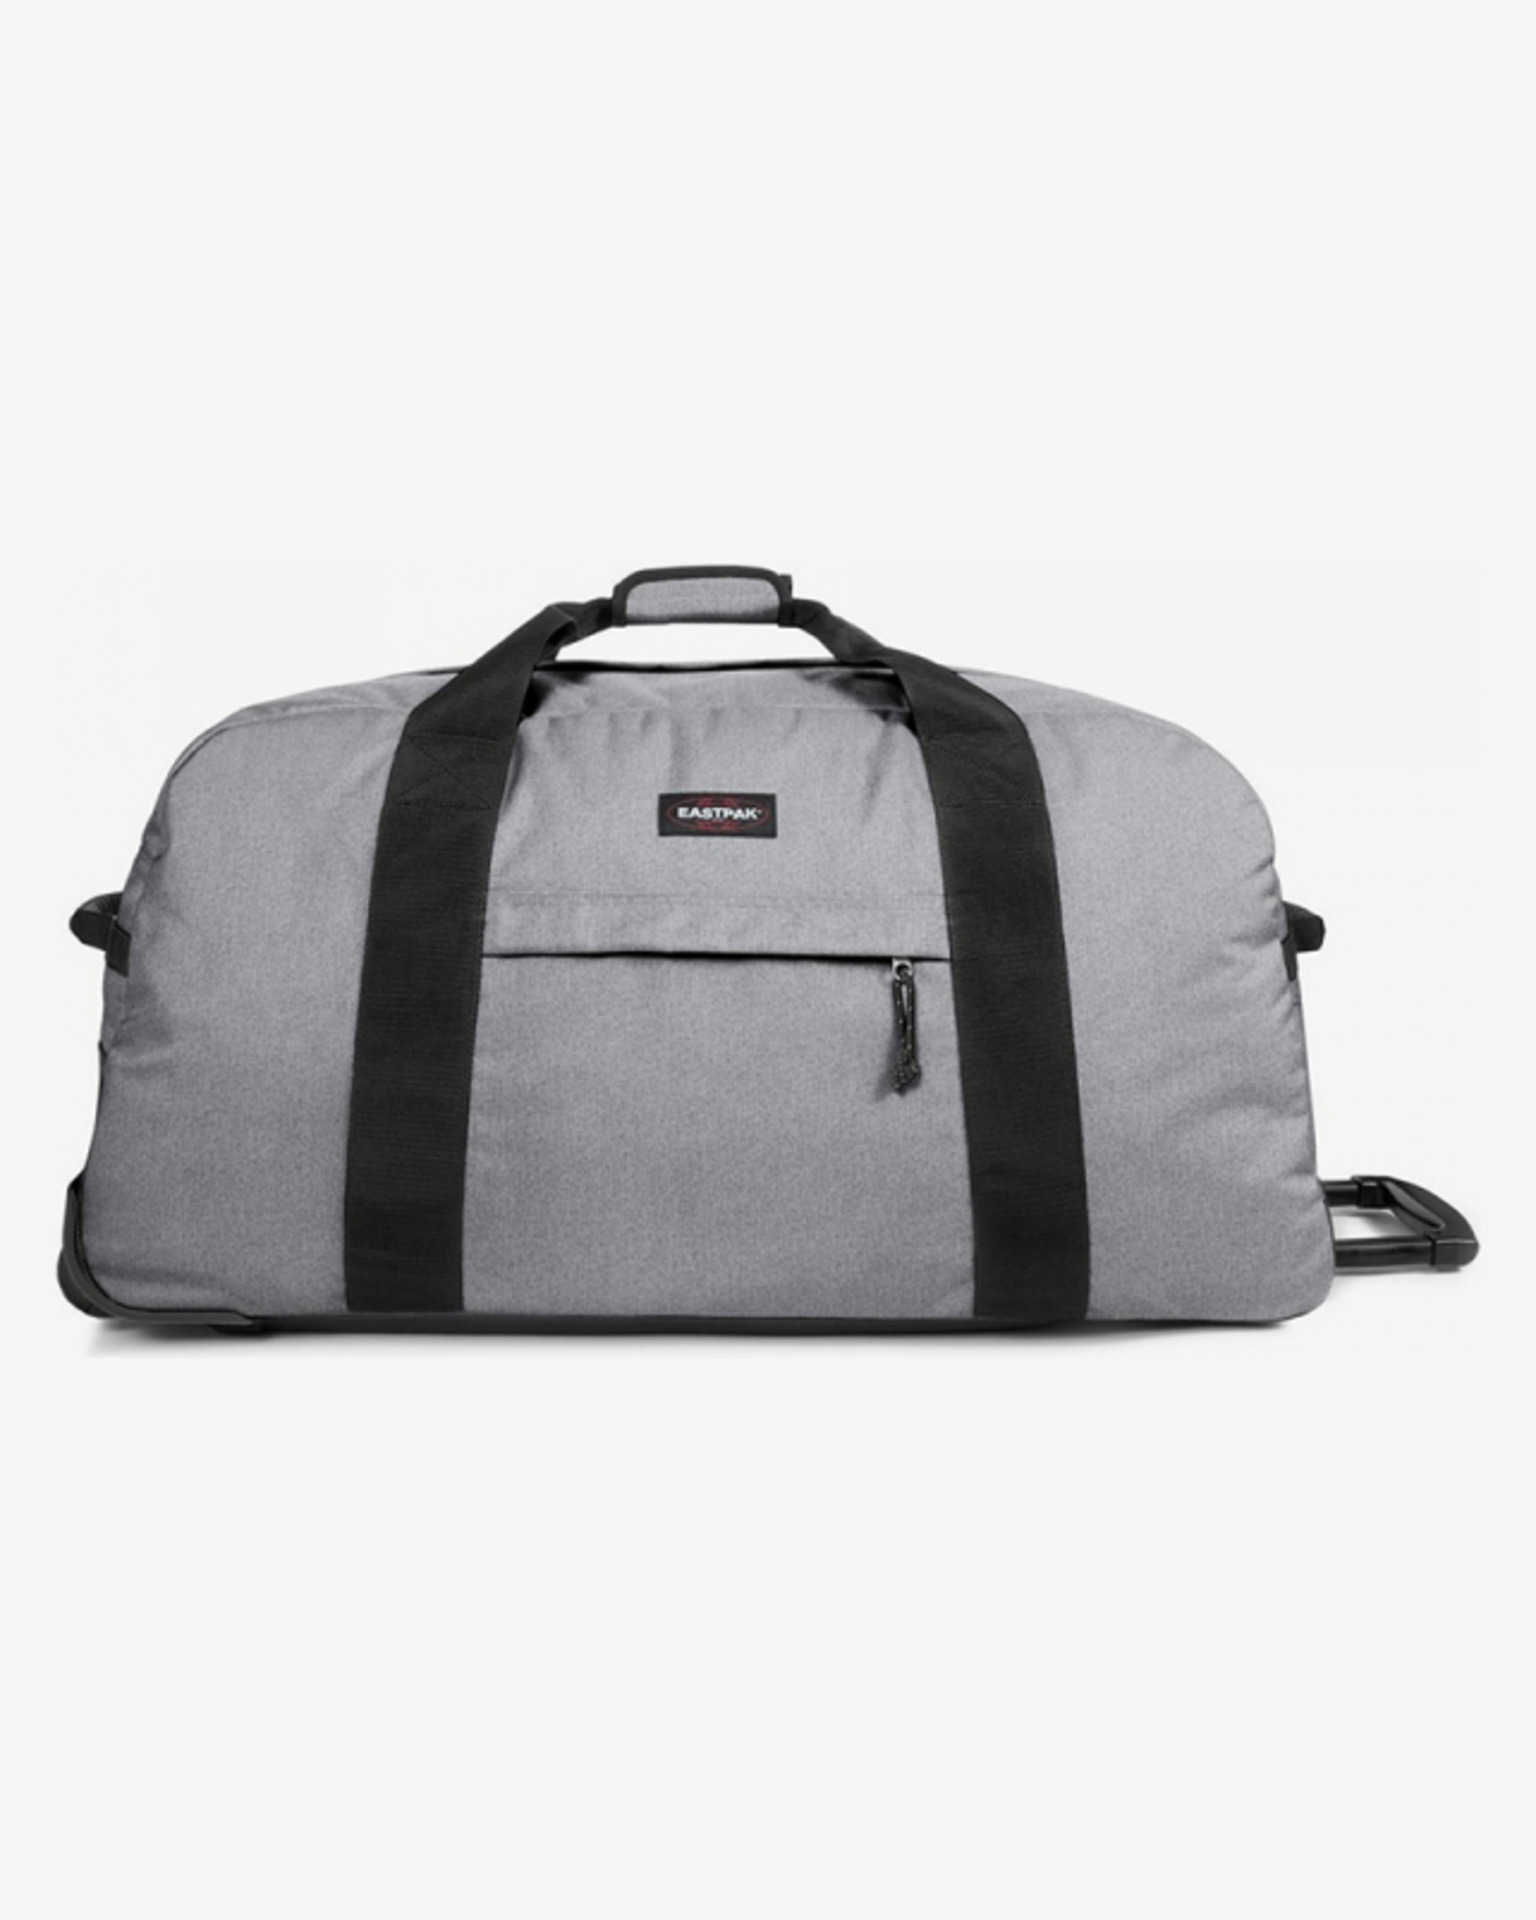 Eastpak - Container 85 Travel bag